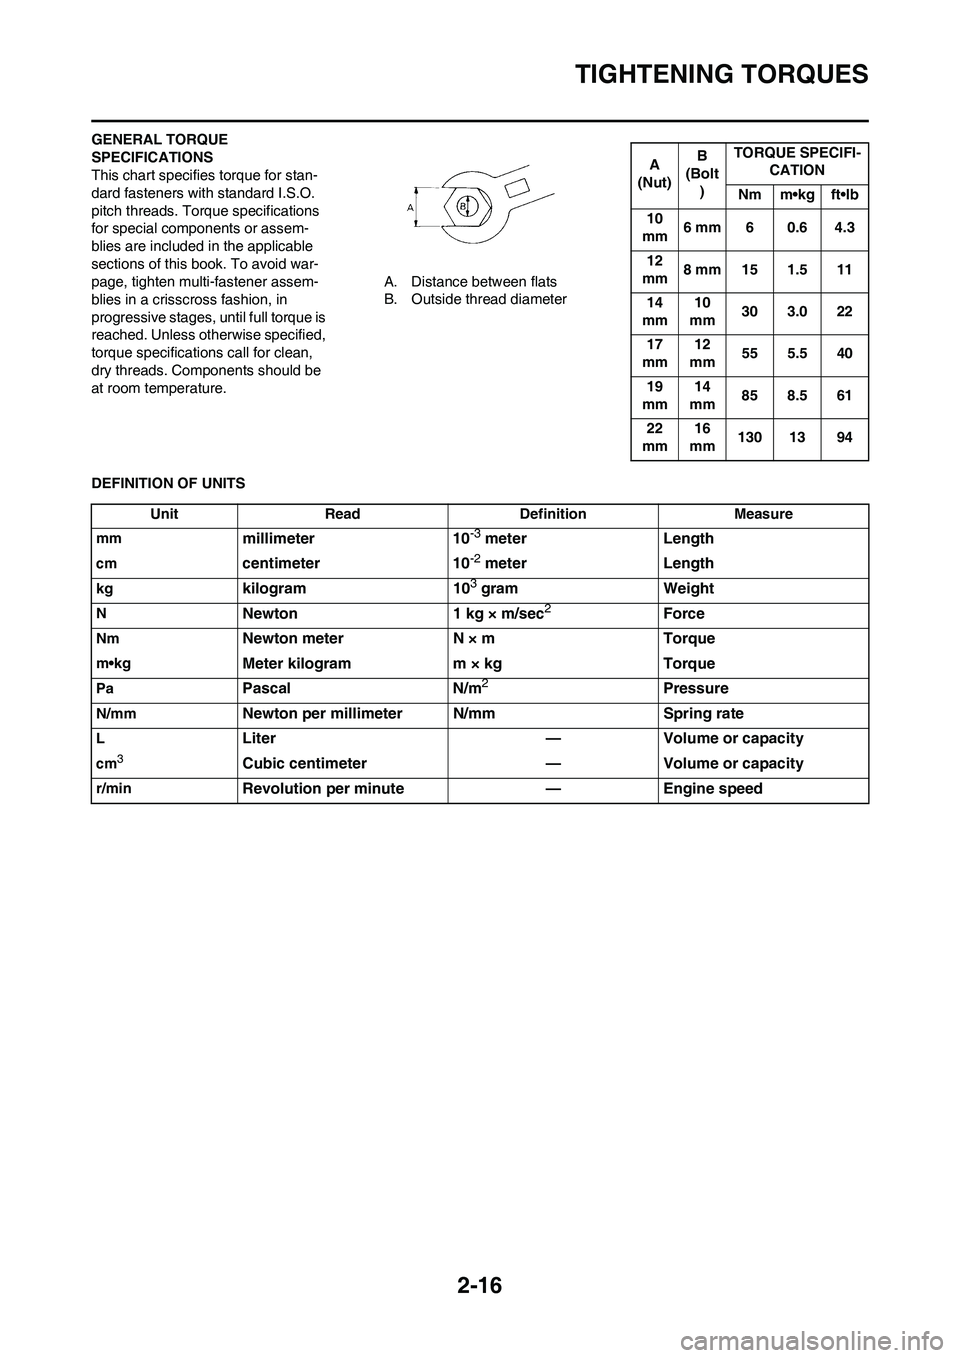 YAMAHA YZ450F 2010 Service Manual 2-16
TIGHTENING TORQUES
GENERAL TORQUE 
SPECIFICATIONS
This chart specifies torque for stan-
dard fasteners with standard I.S.O. 
pitch threads. Torque specifications 
for special components or assem-